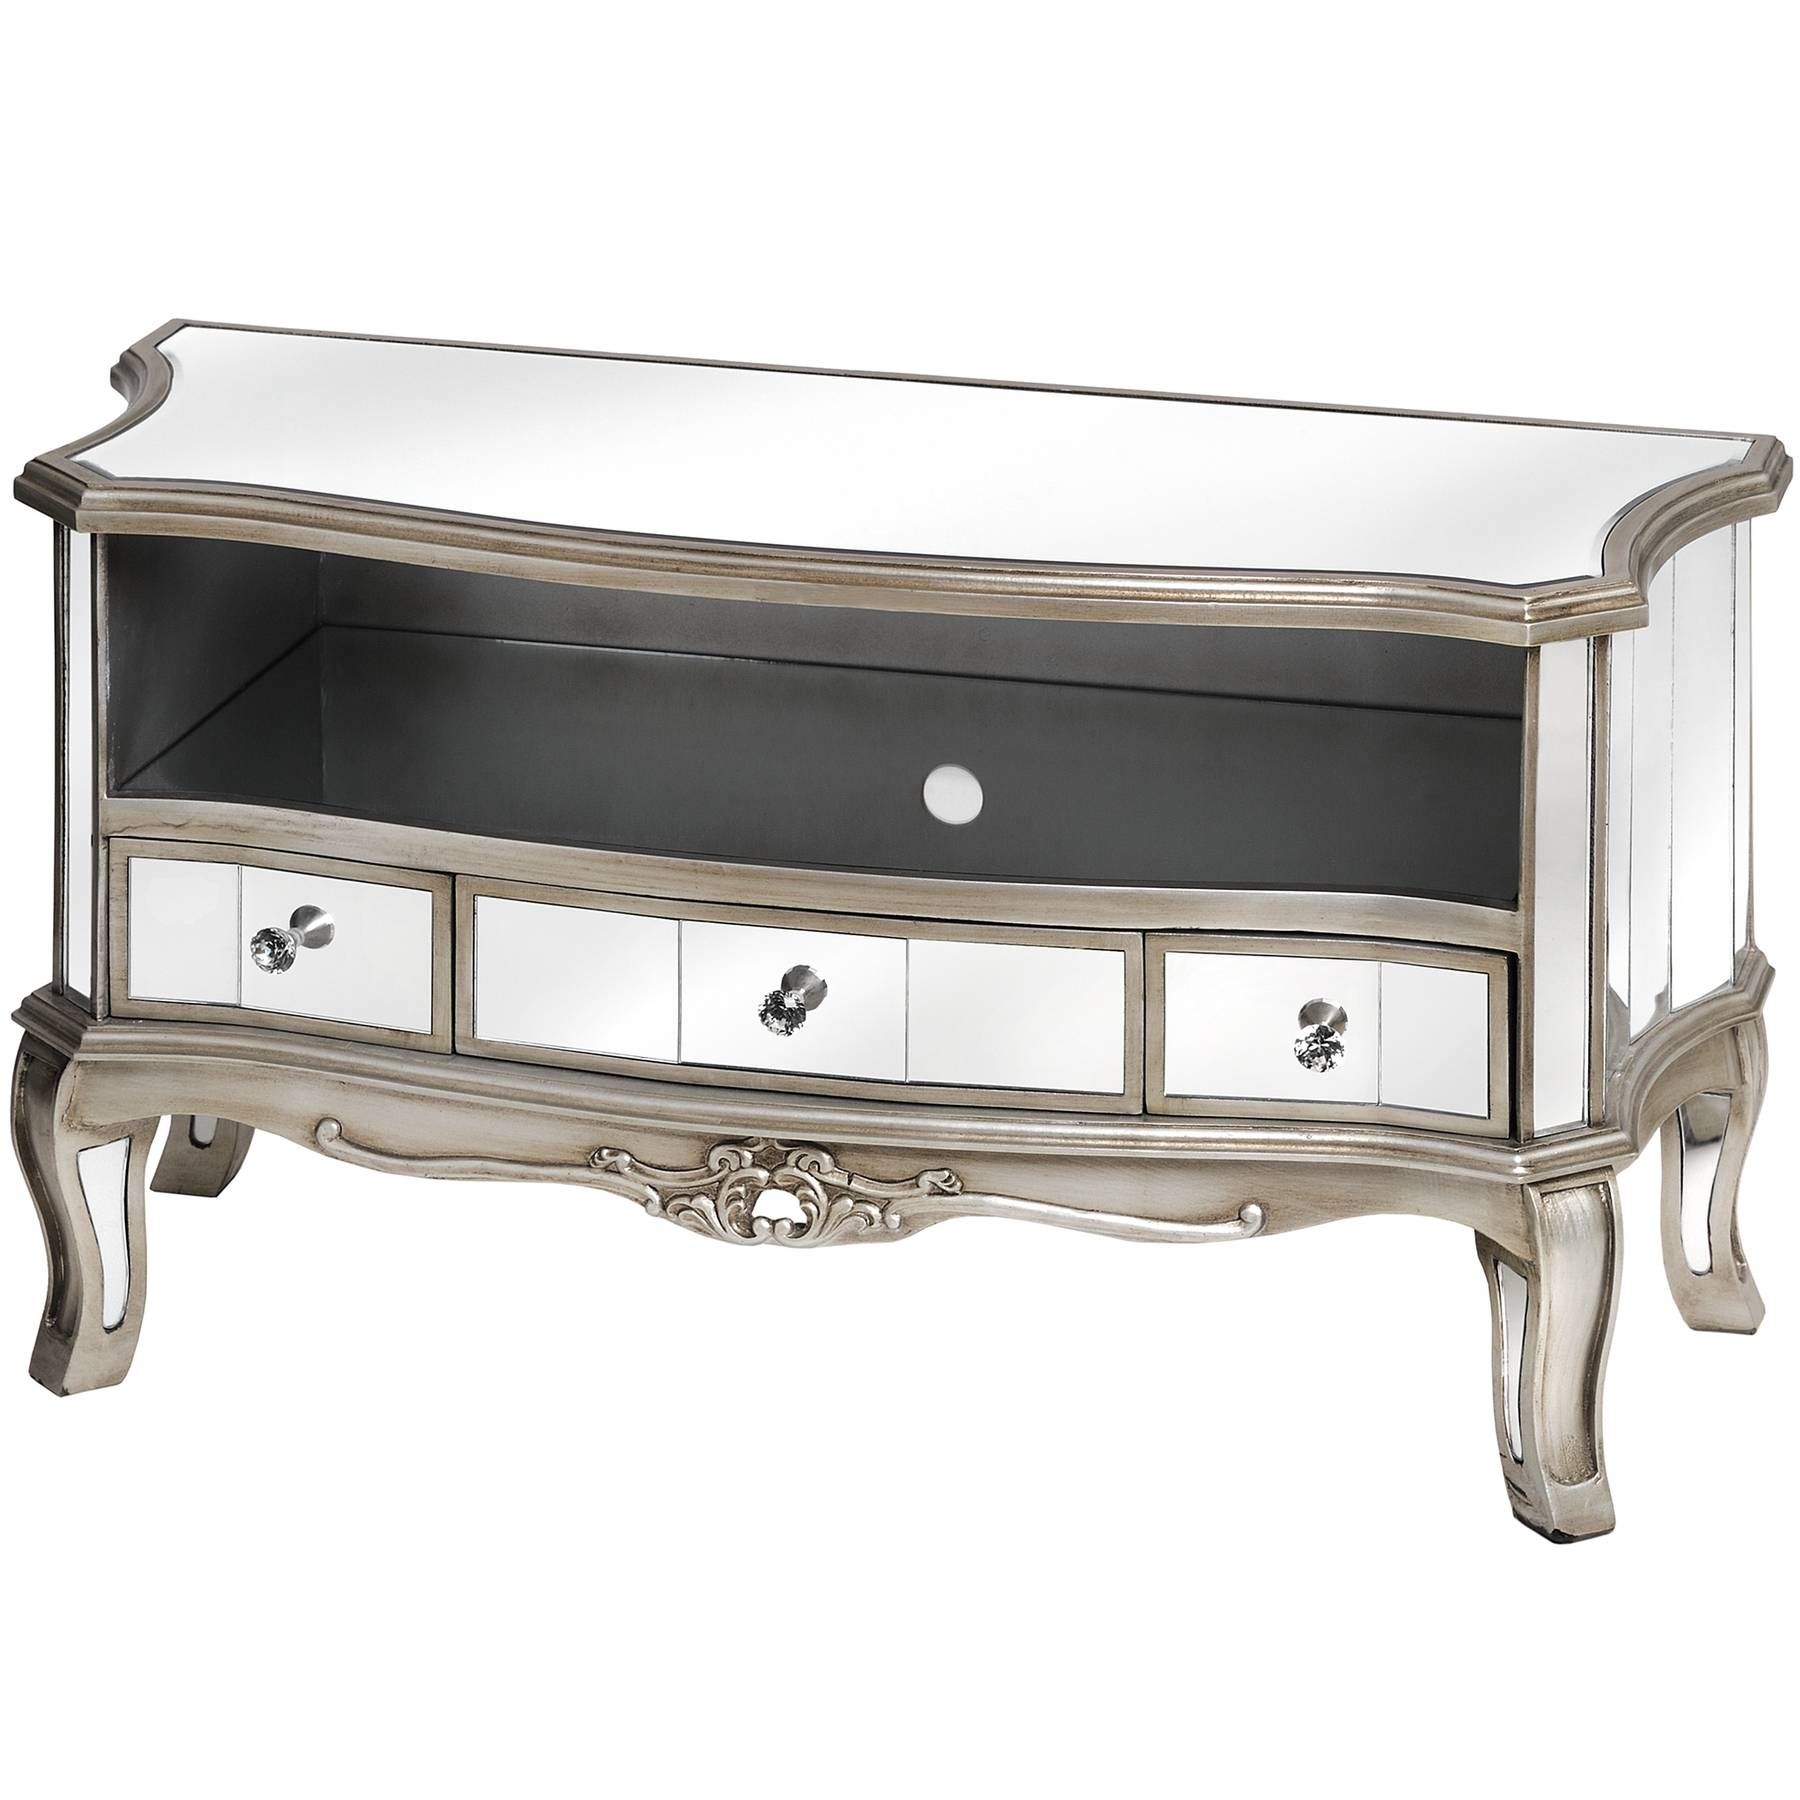 Argente Mirrored Television Cabinet | From Baytree Interiors Pertaining To Mirrored Tv Cabinets Furniture (View 6 of 15)